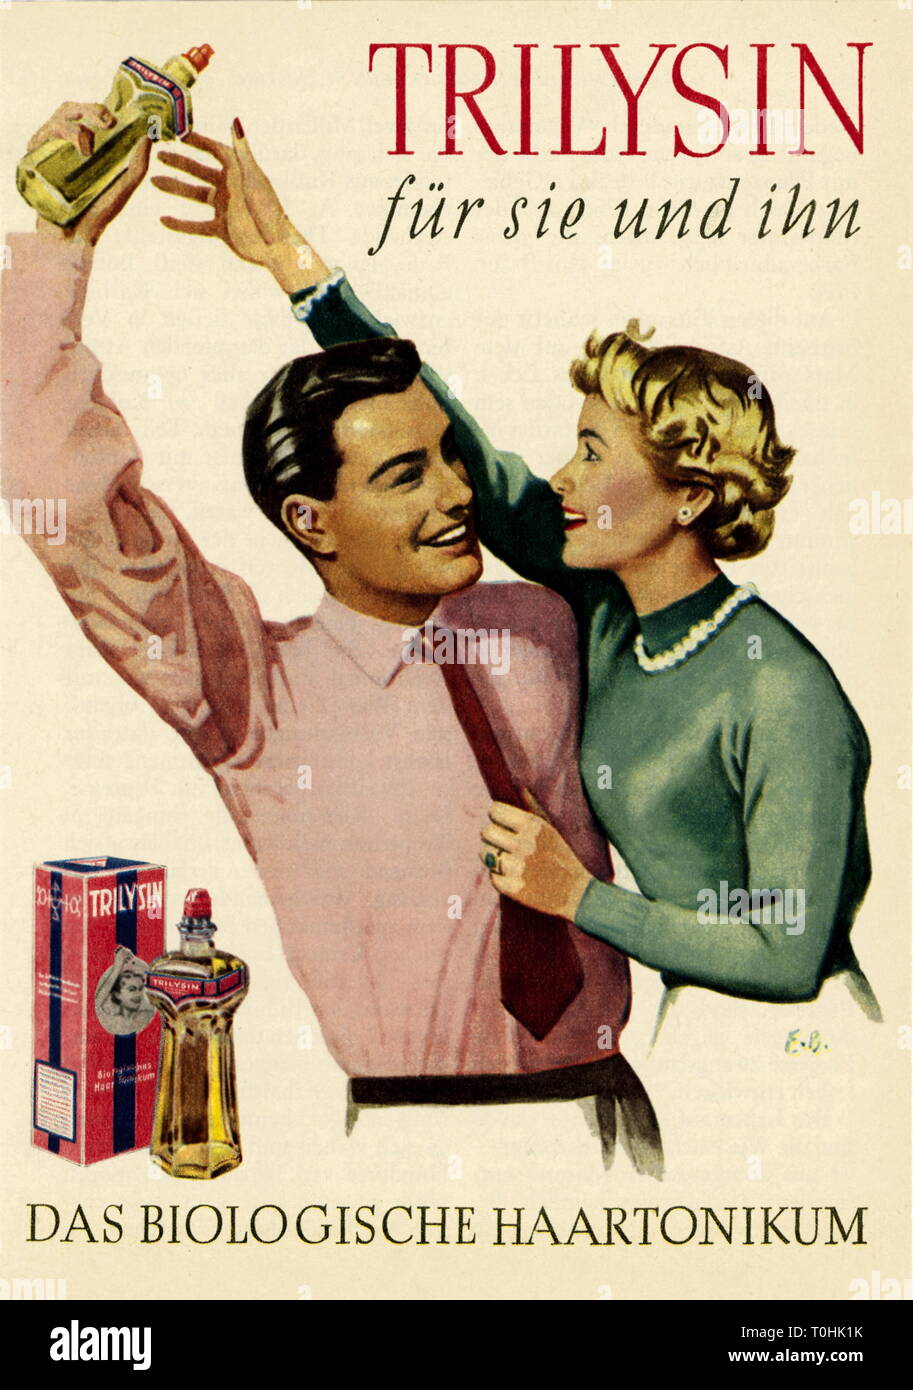 advertising, cosmetics, hair tonic Trilysin, "fuer Sie und Ihn" (for ladies and gents), Germany, circa 1953, Additional-Rights-Clearance-Info-Not-Available Stock Photo